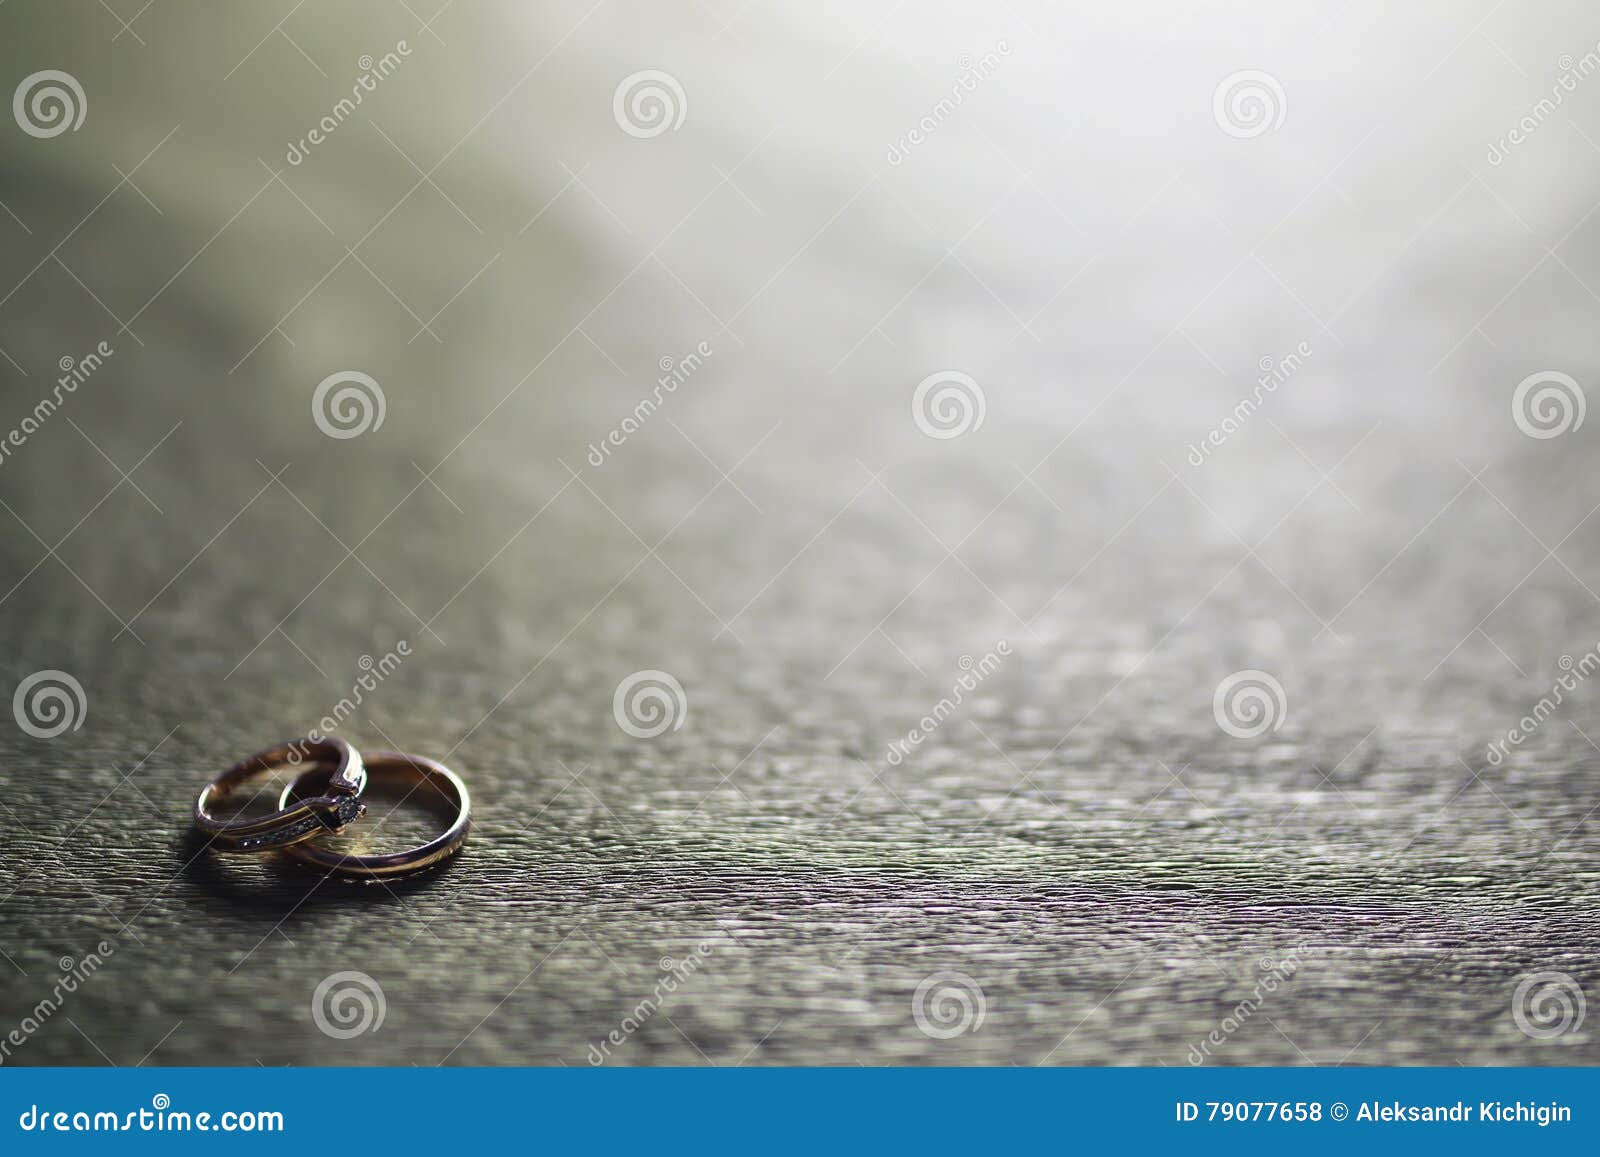 Things to do With Wedding Ring After Death - Palm Harbor, FL